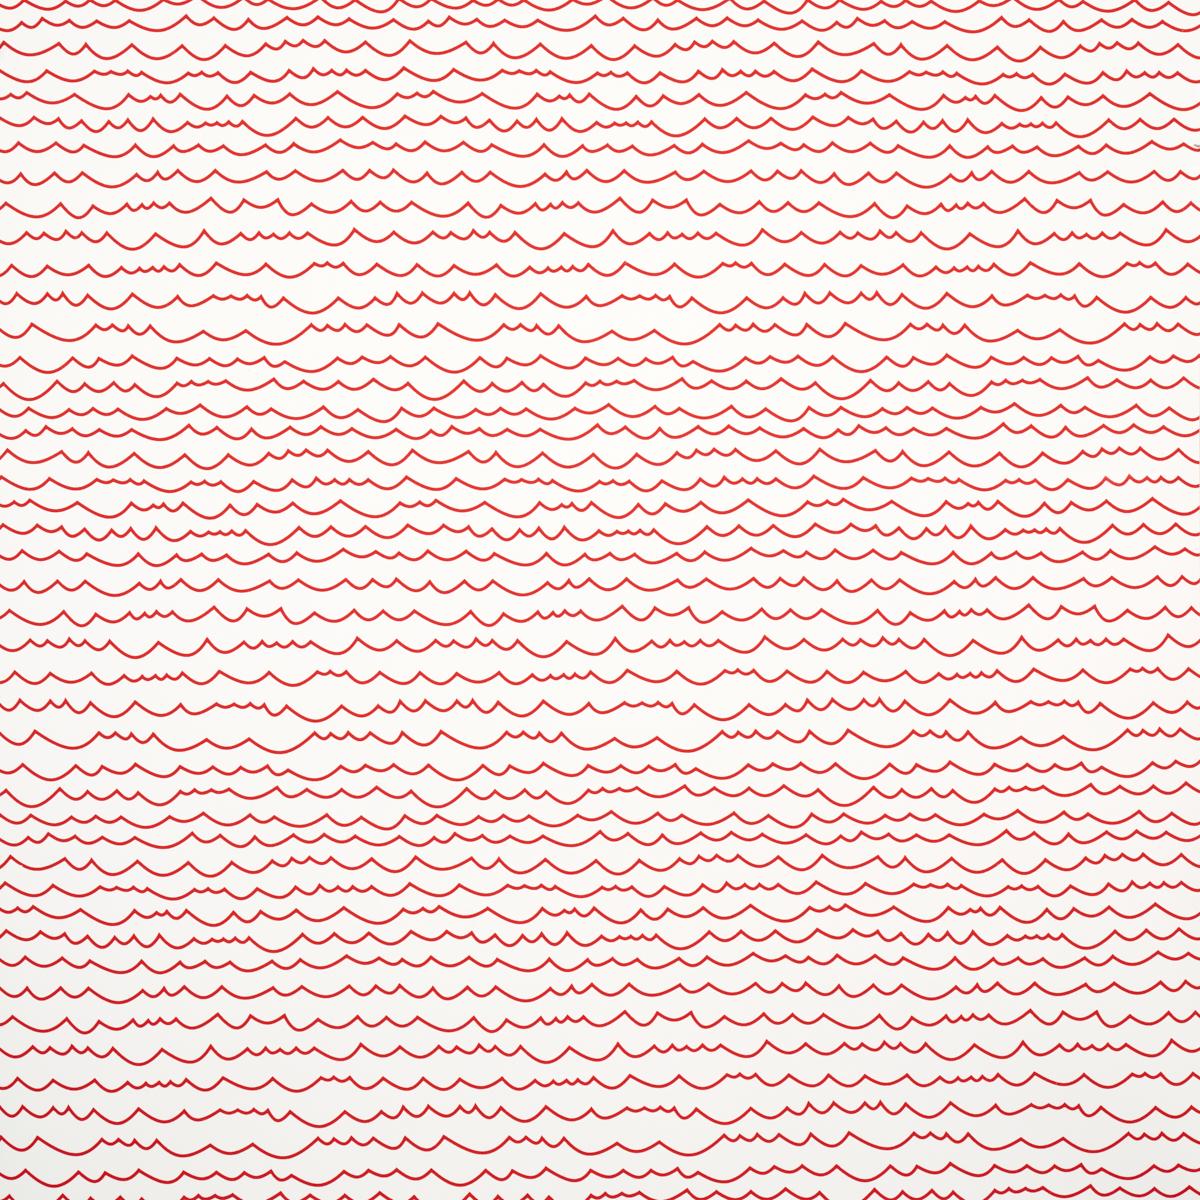 WAVES_RED